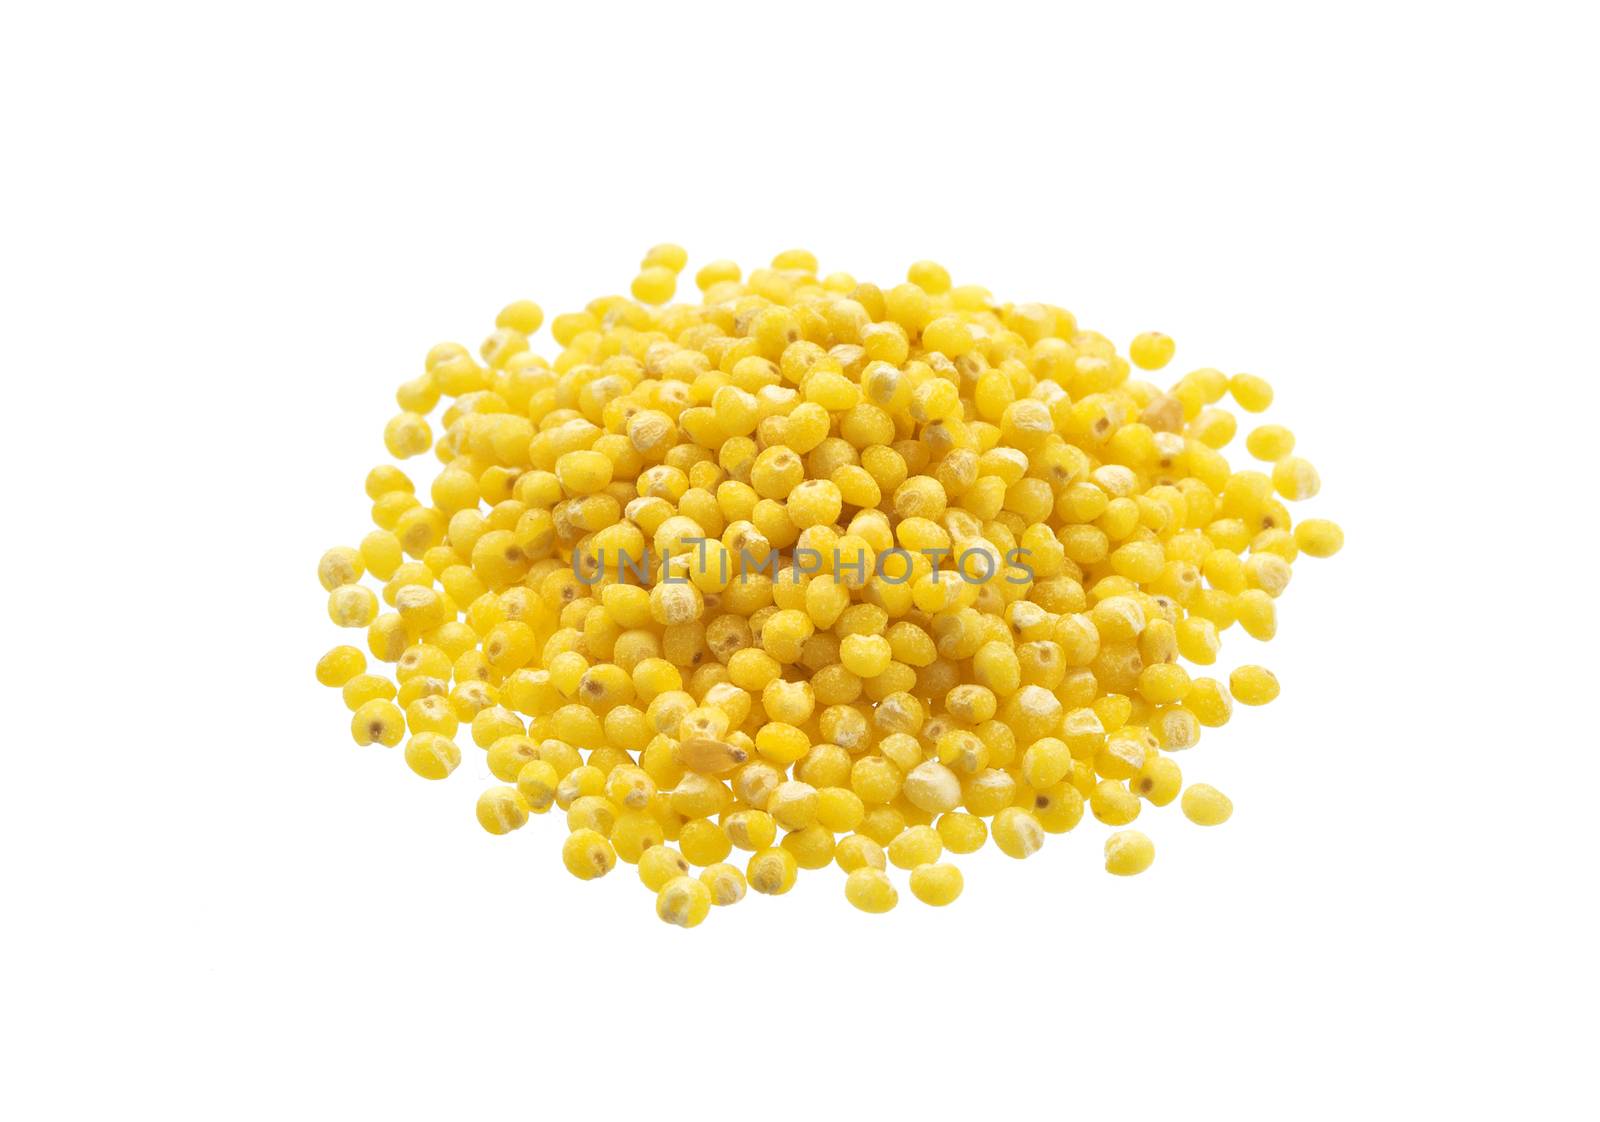 Millet isolated on white background with clipping path